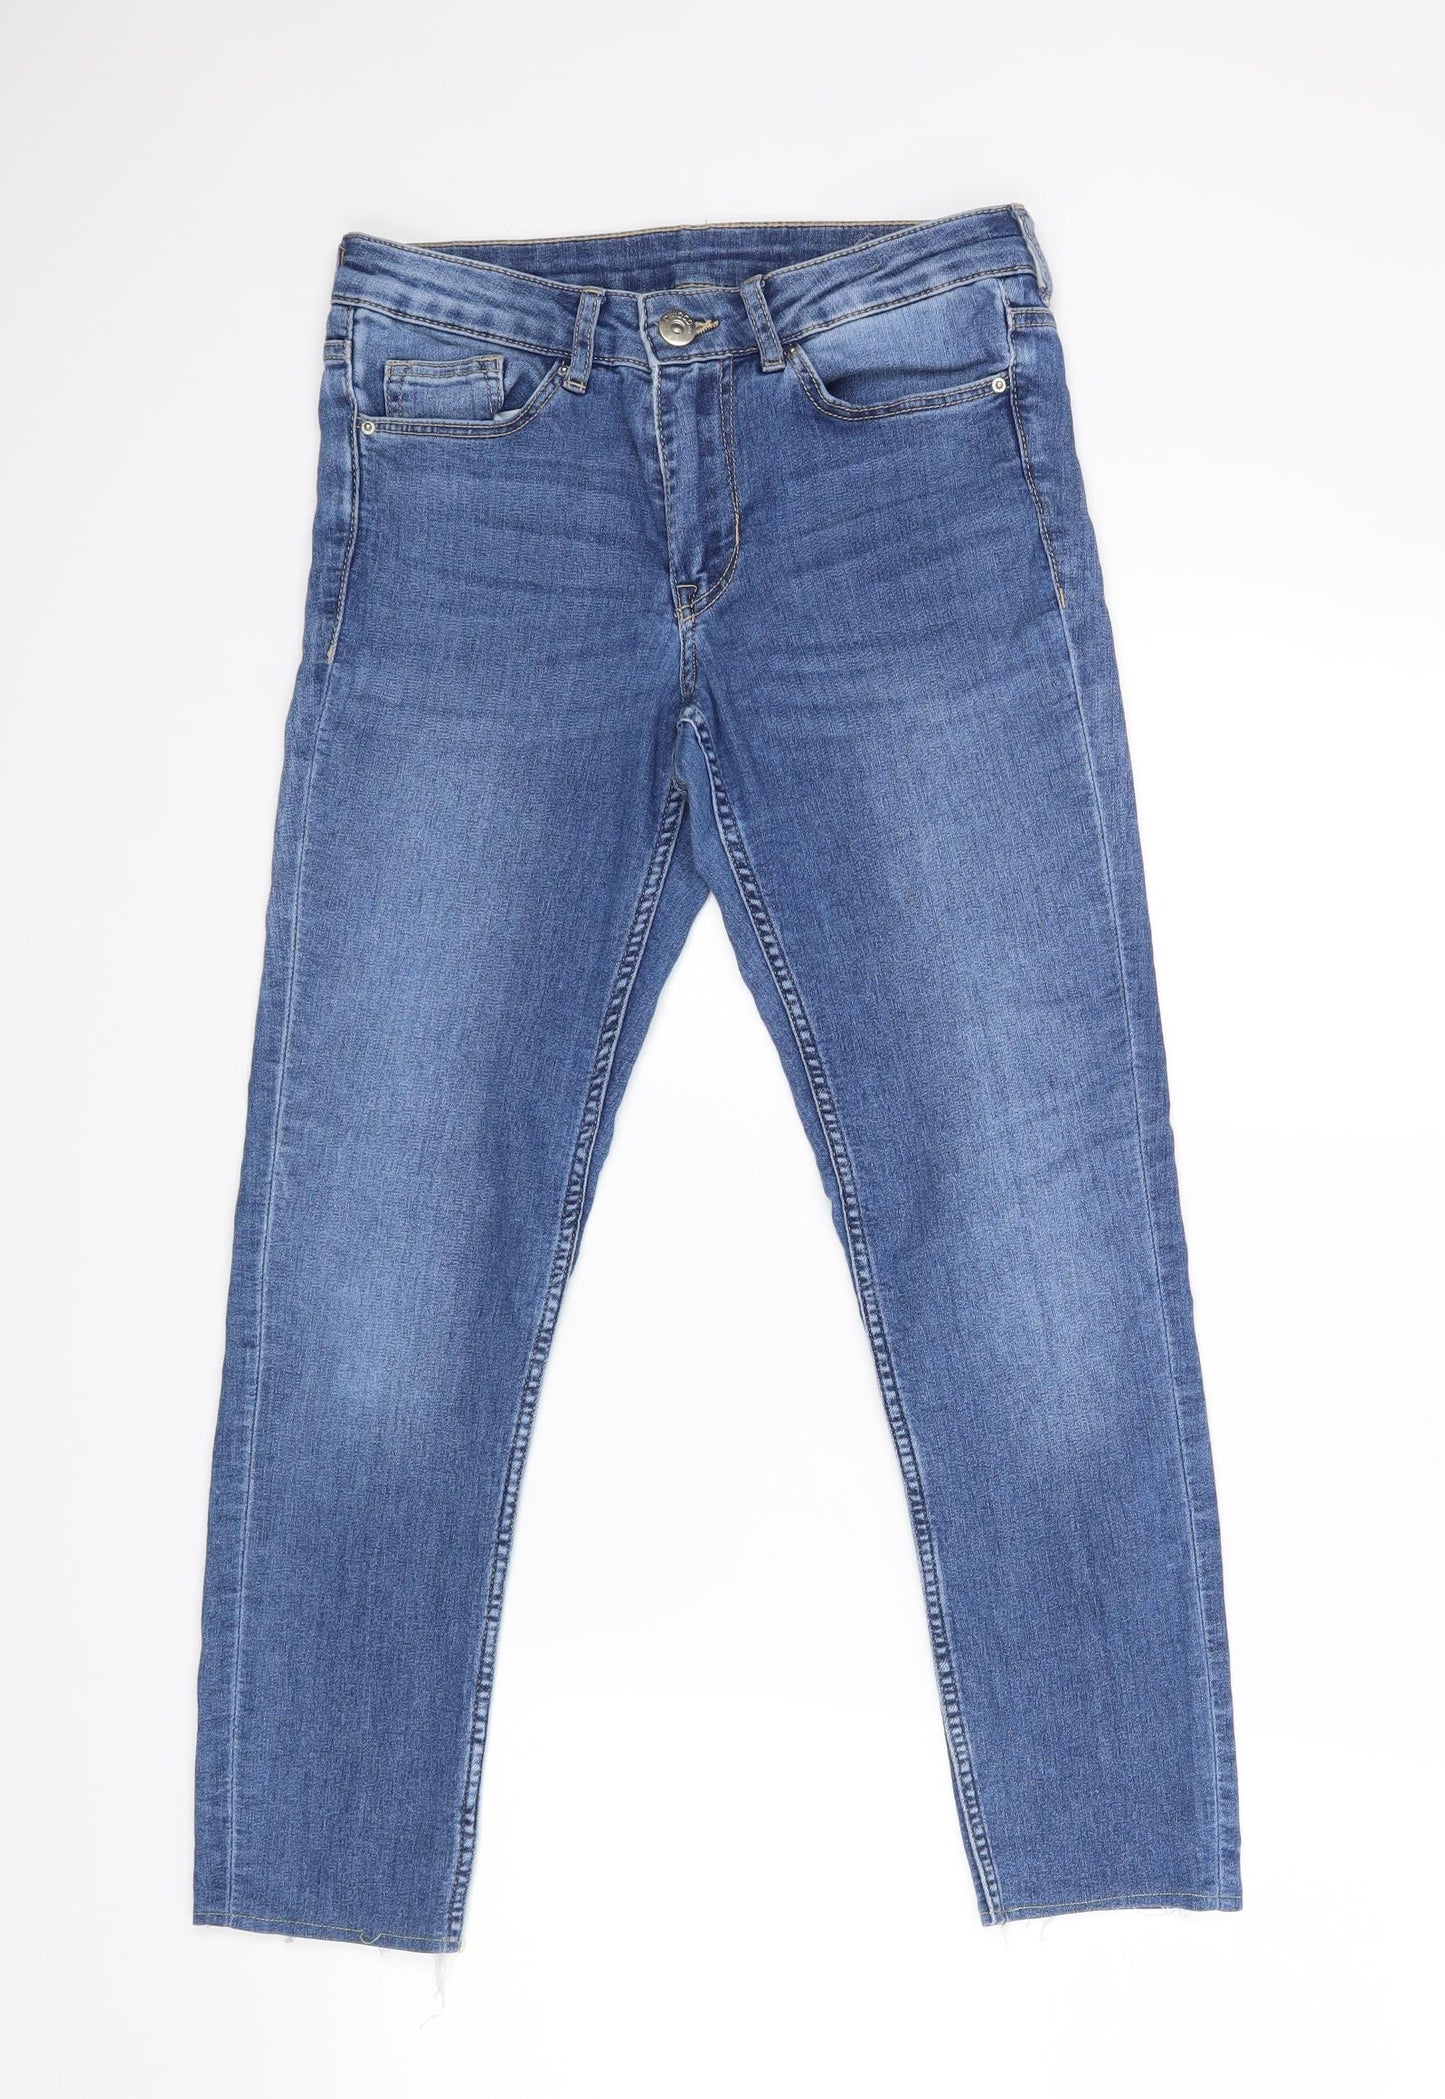 H&M Womens Blue   Straight Jeans Size 8 L24 in